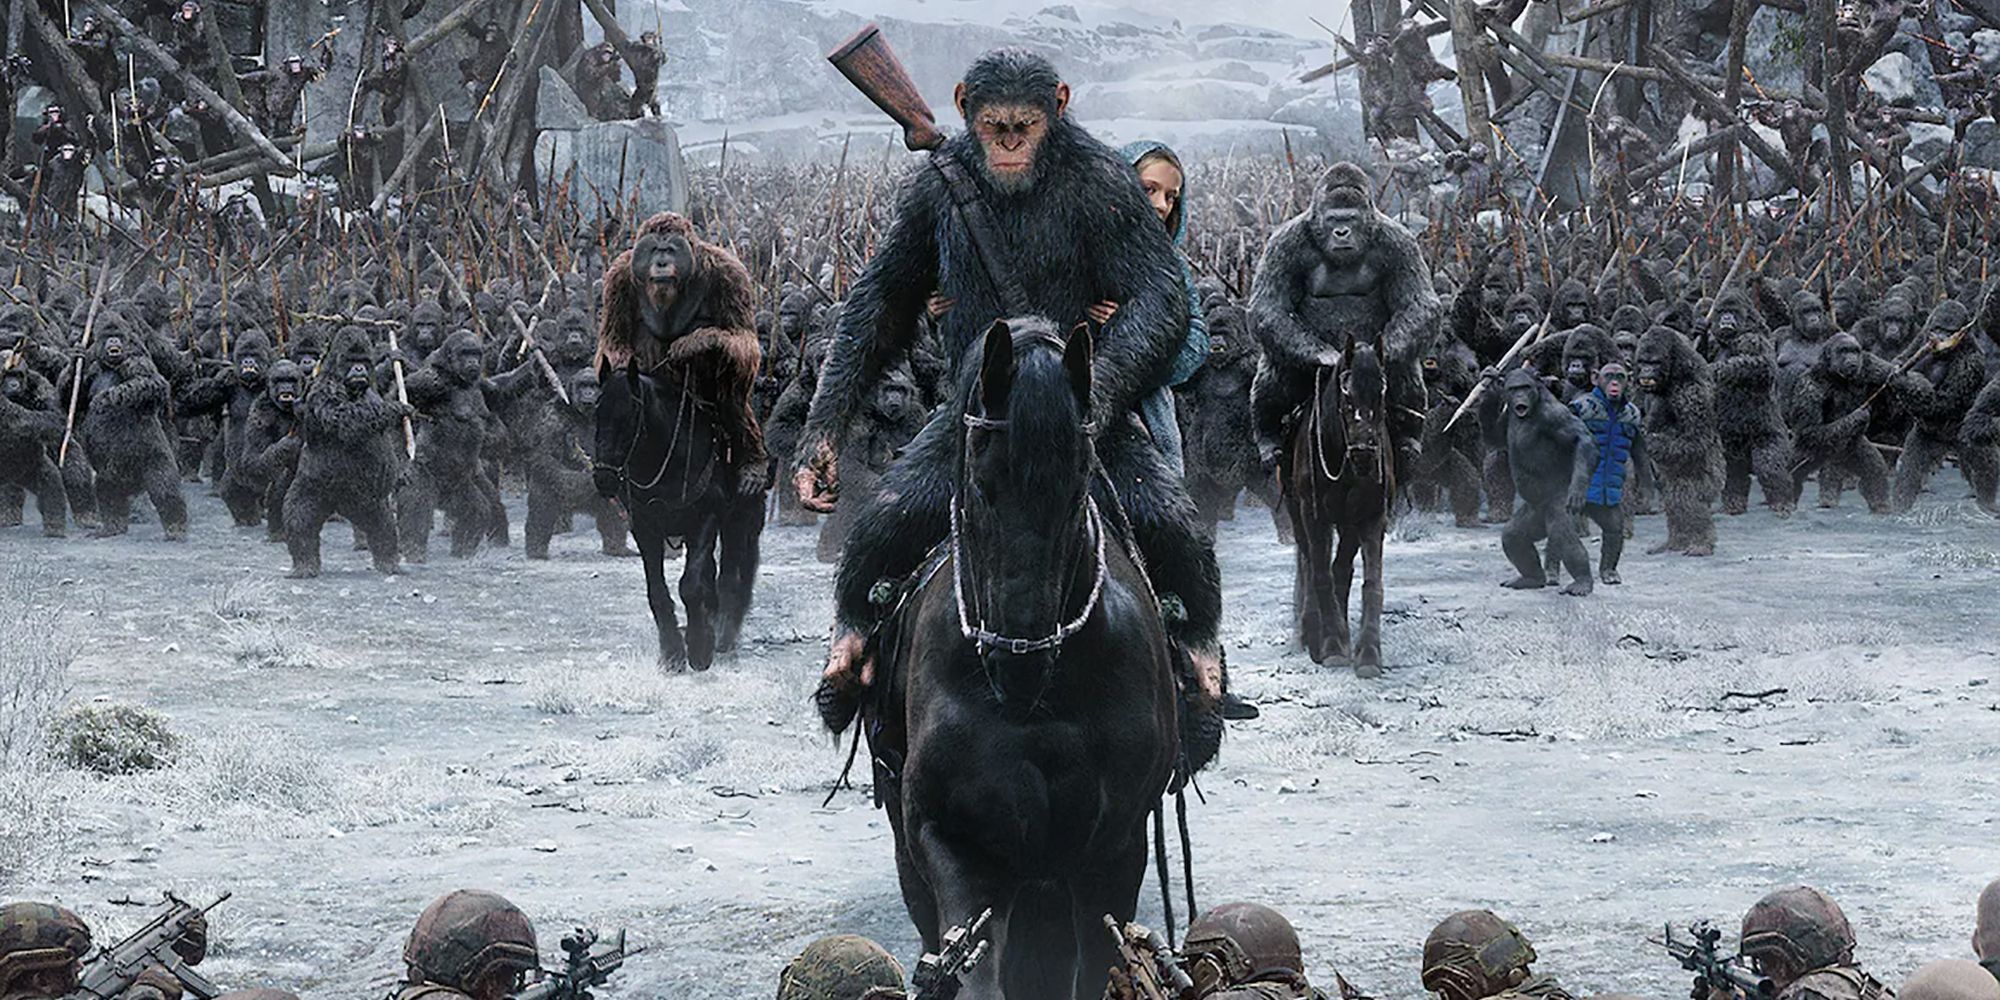 Caesar riding a horse in War For The Planet Of The Apes